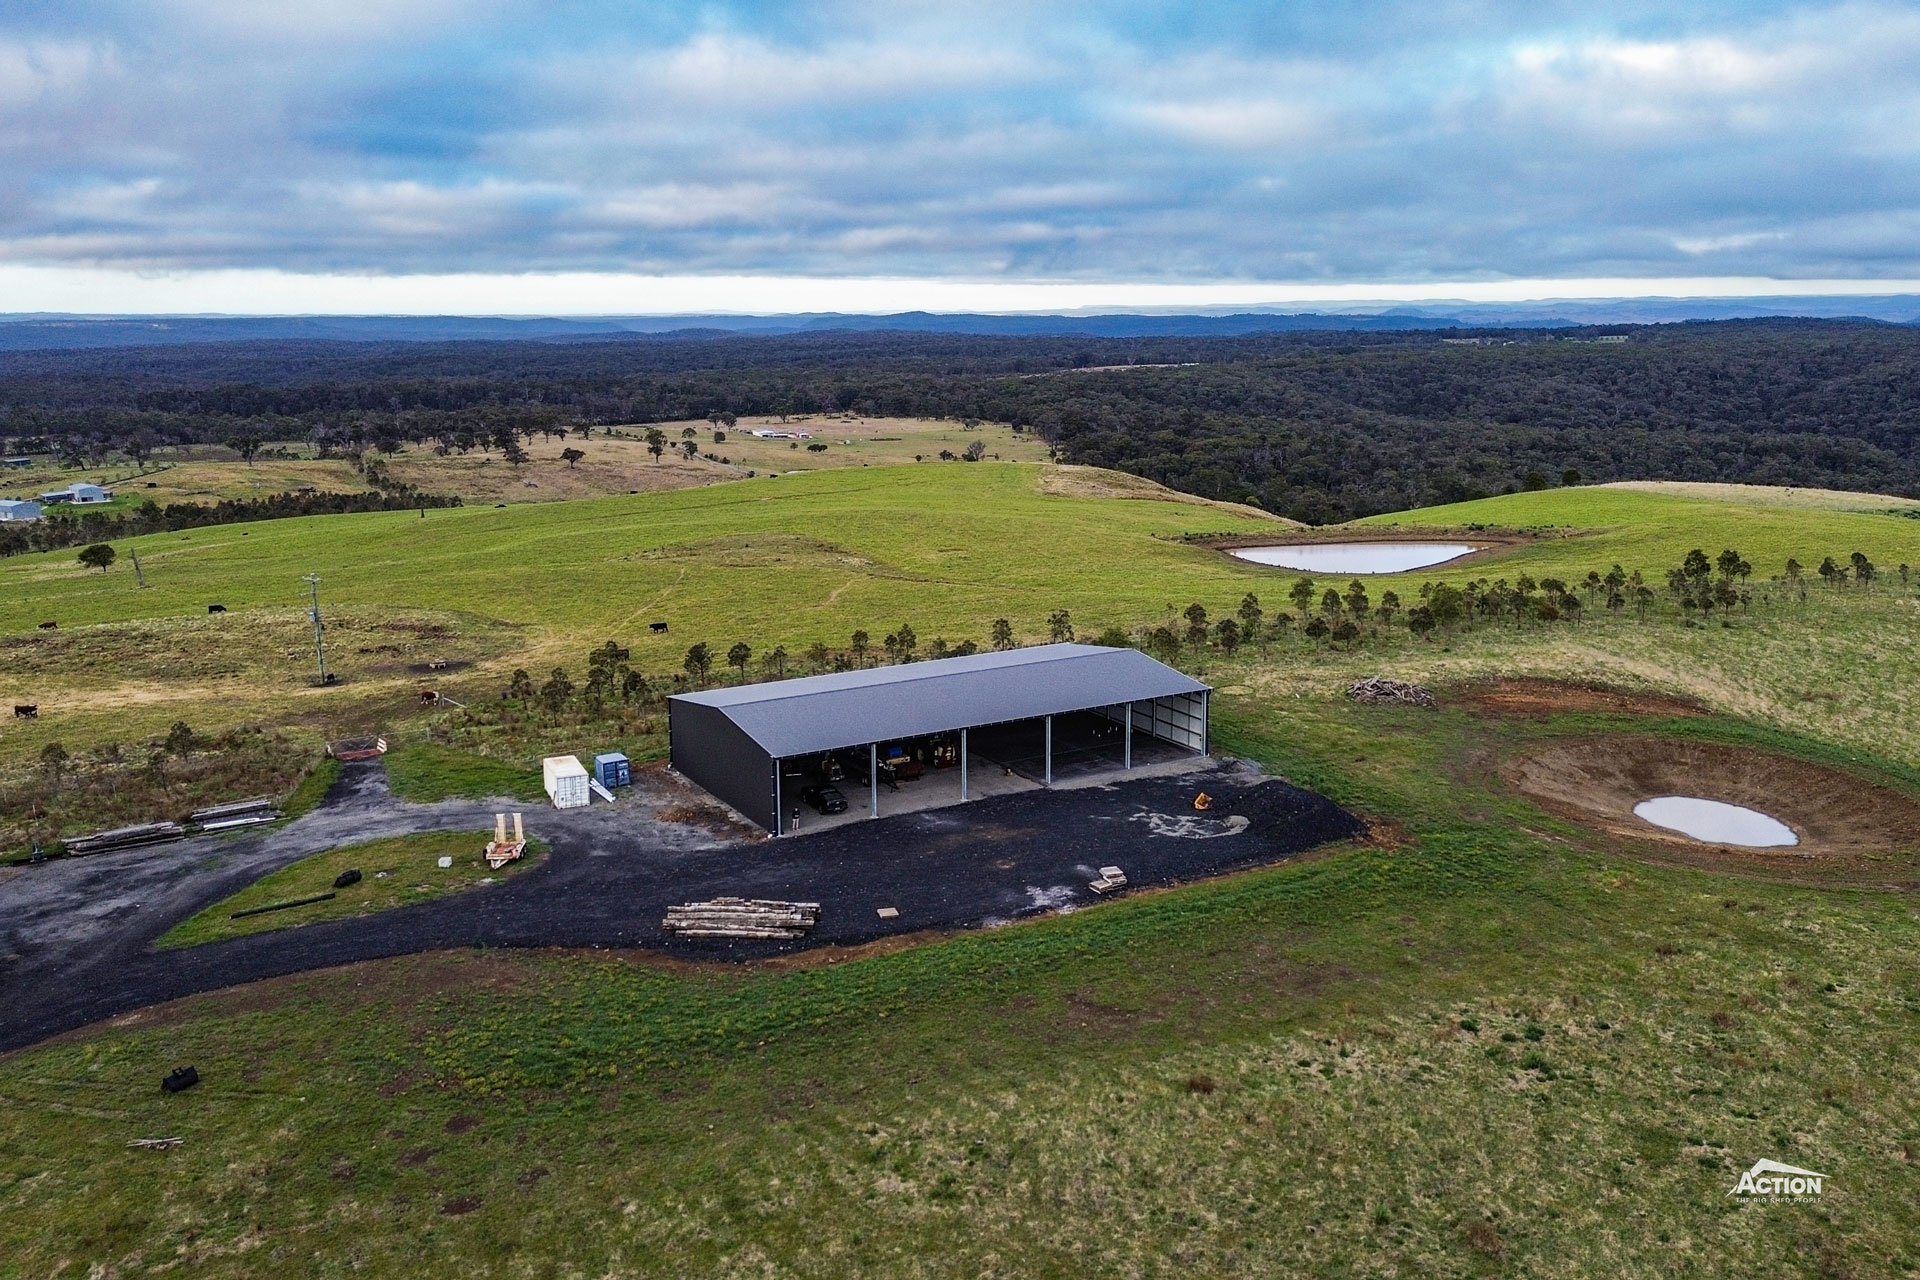 Drone photo of 21m span farm shed in NSW